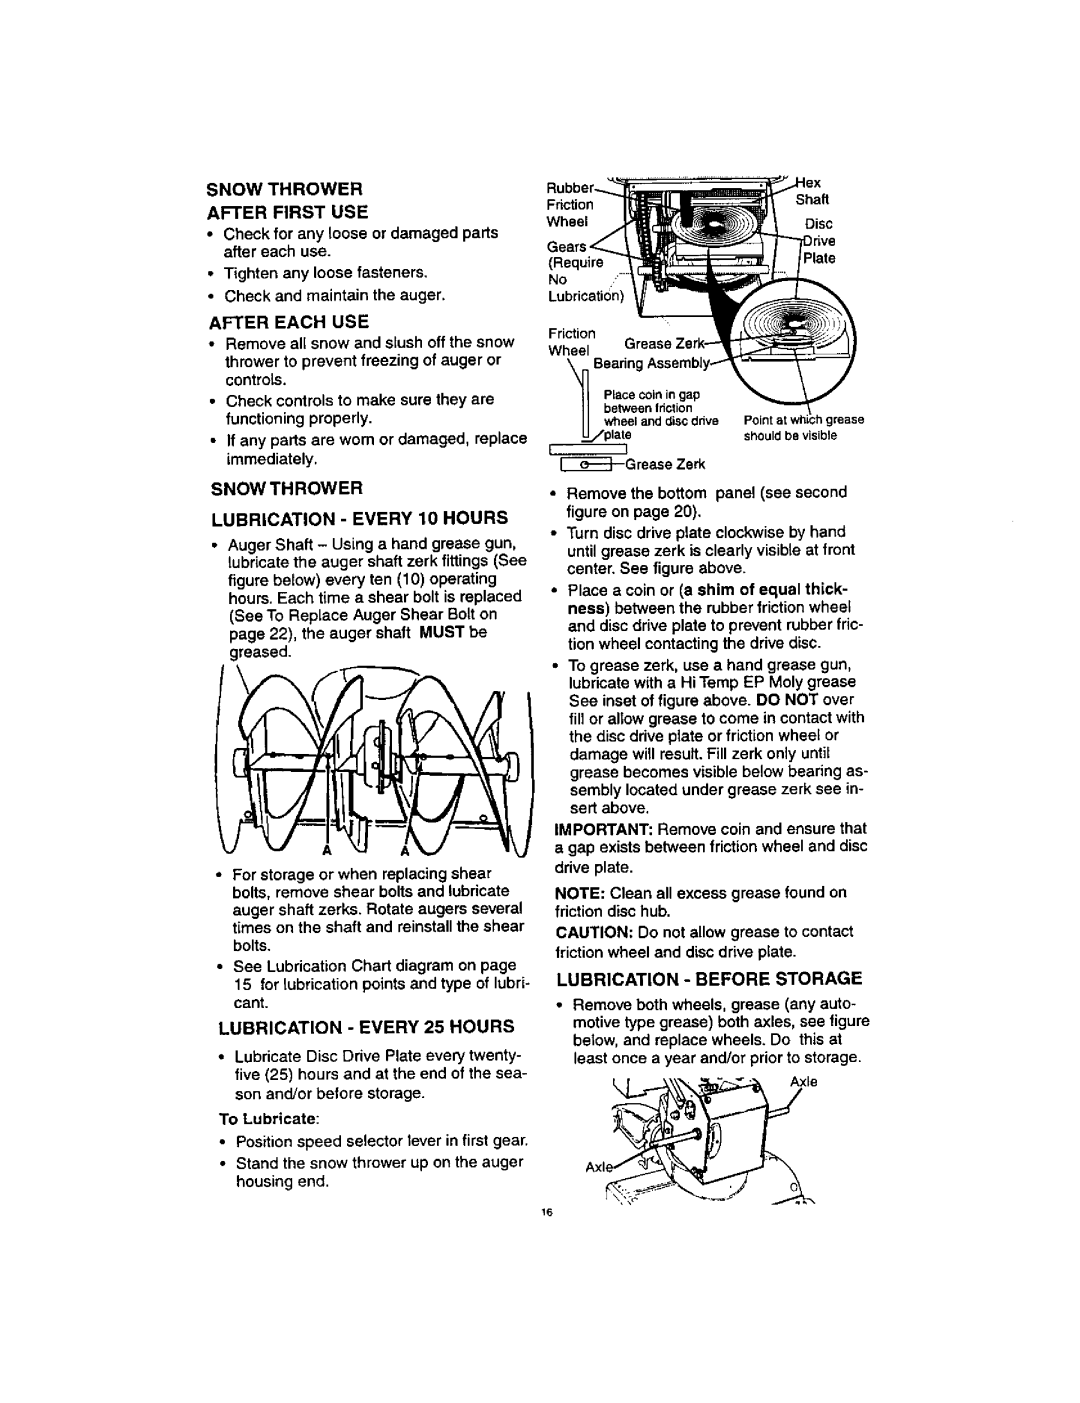 Craftsman 536.88123 operating instructions LUBRICATION - EVERY 10 HOURS, Lubrication - Before Storage 